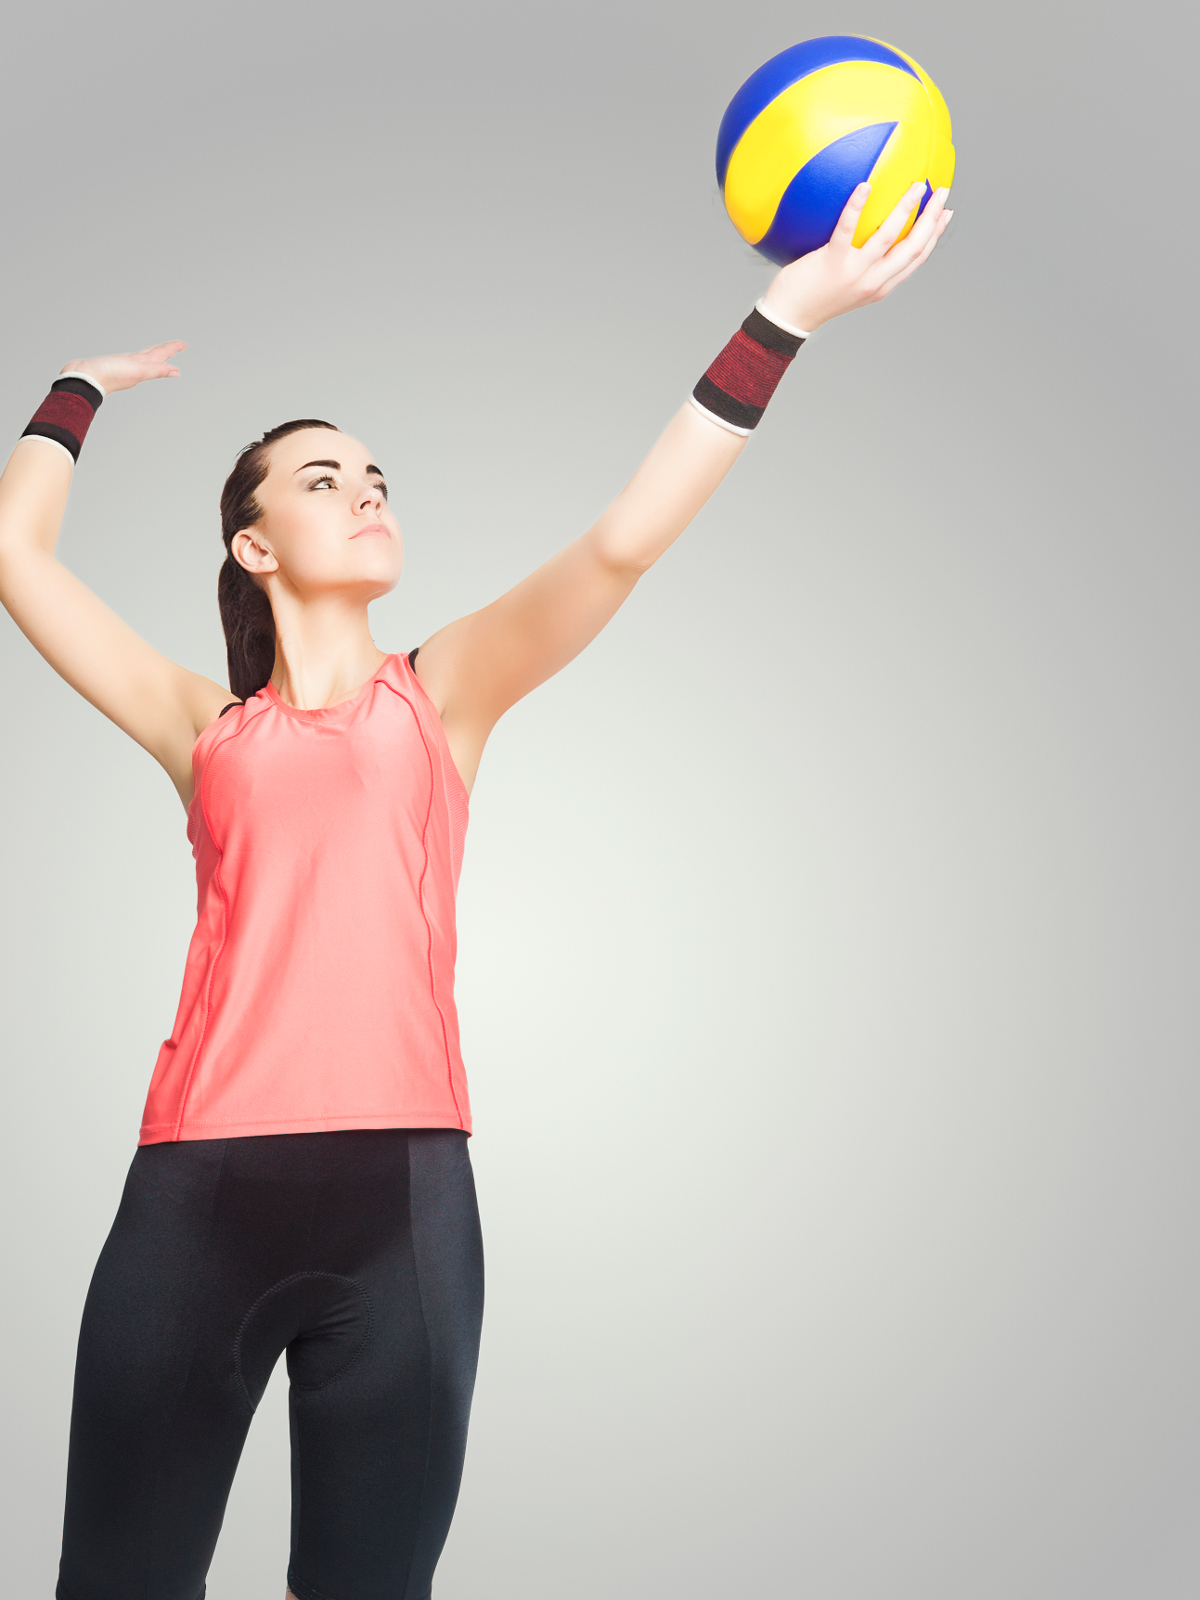 Basic Techniques and Moves to Master Your Volleyball ...
